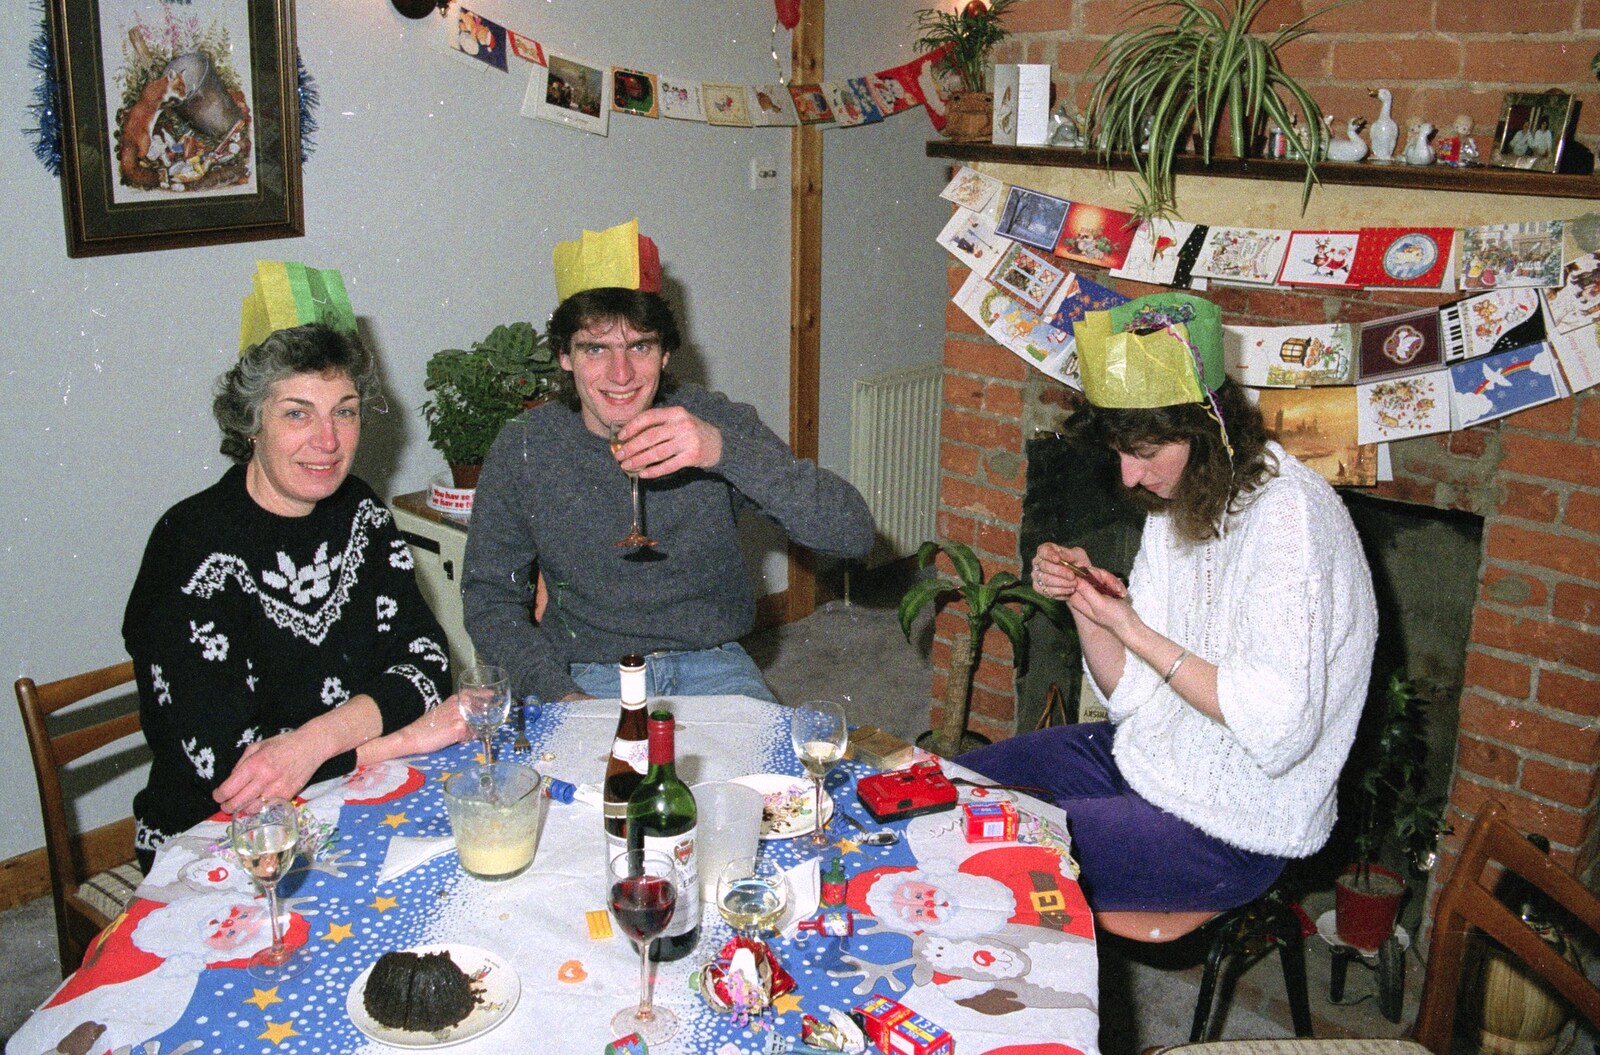 Christmas pudding from Late Night, and Christmas with the Coxes, Needham, Norfolk - 25th December 1989